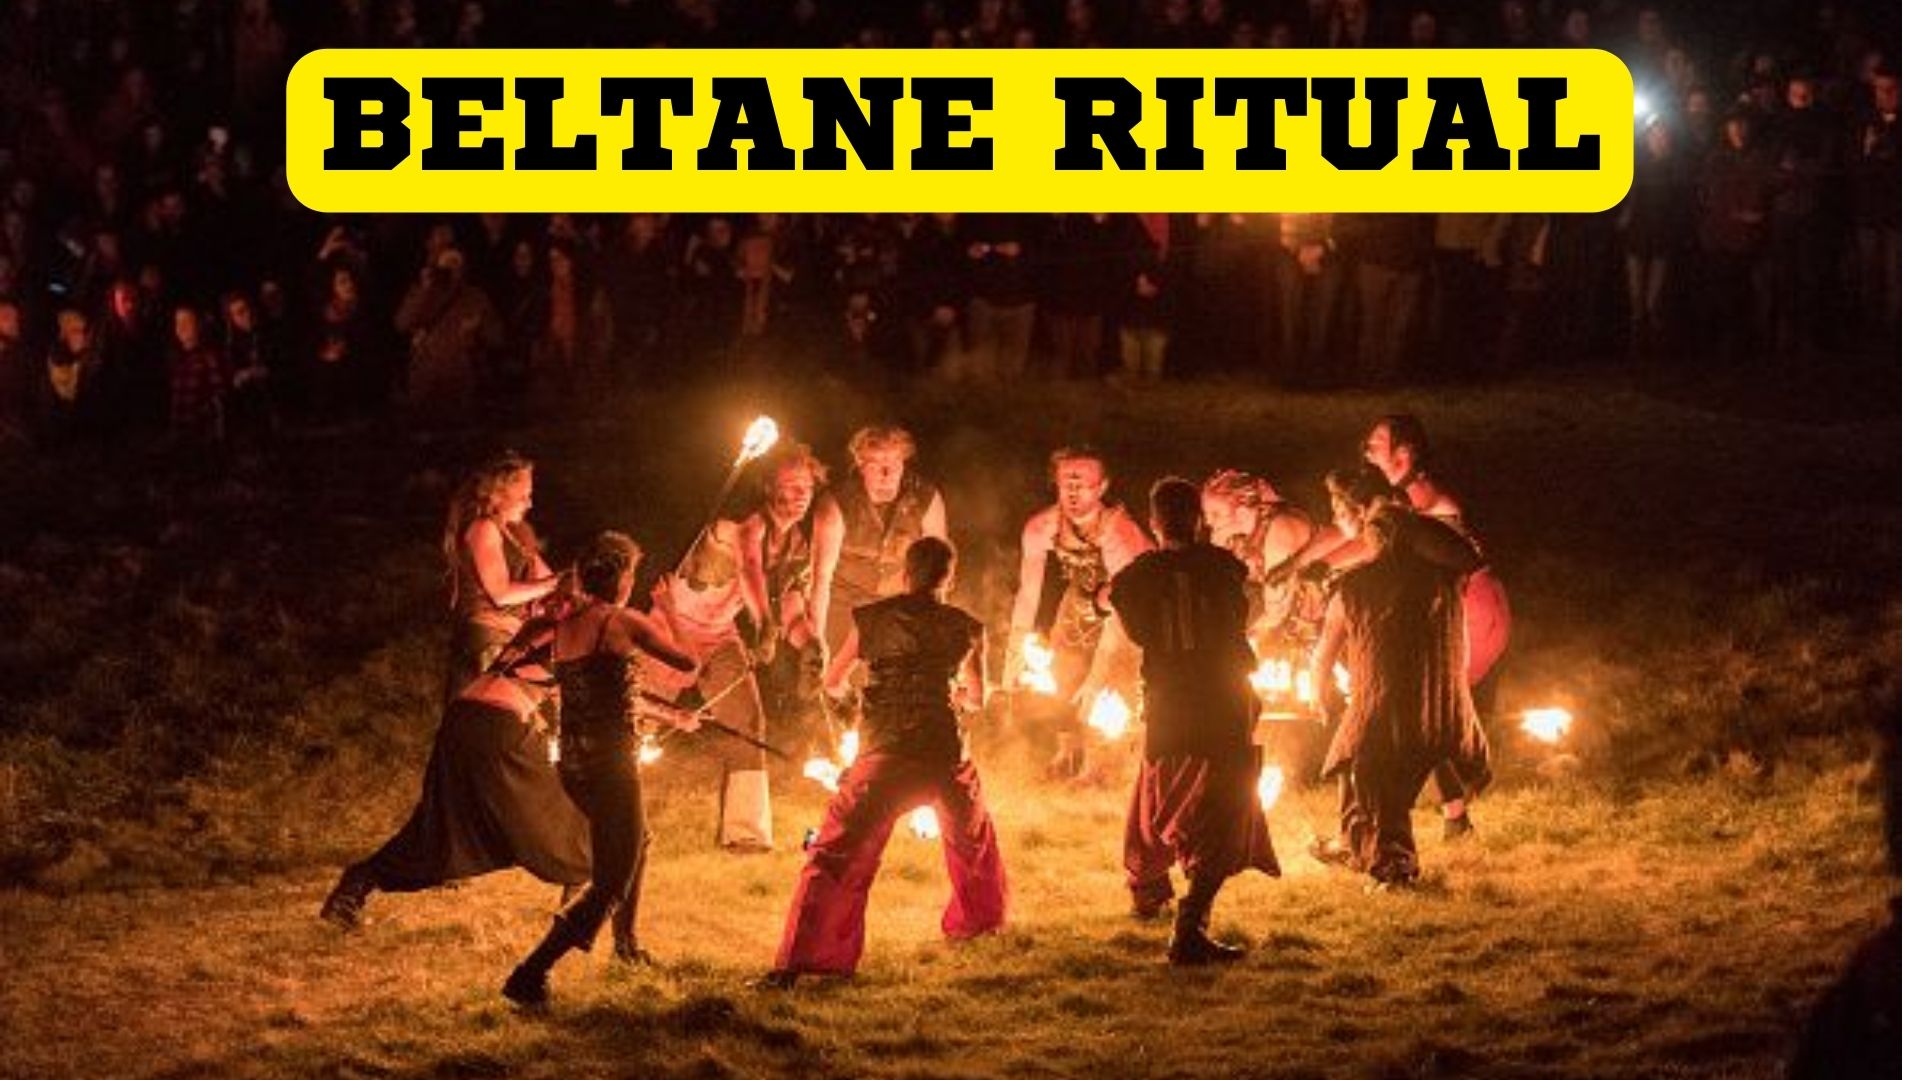 Beltane Ritual - Time To Celebrate The Rites Of Spring